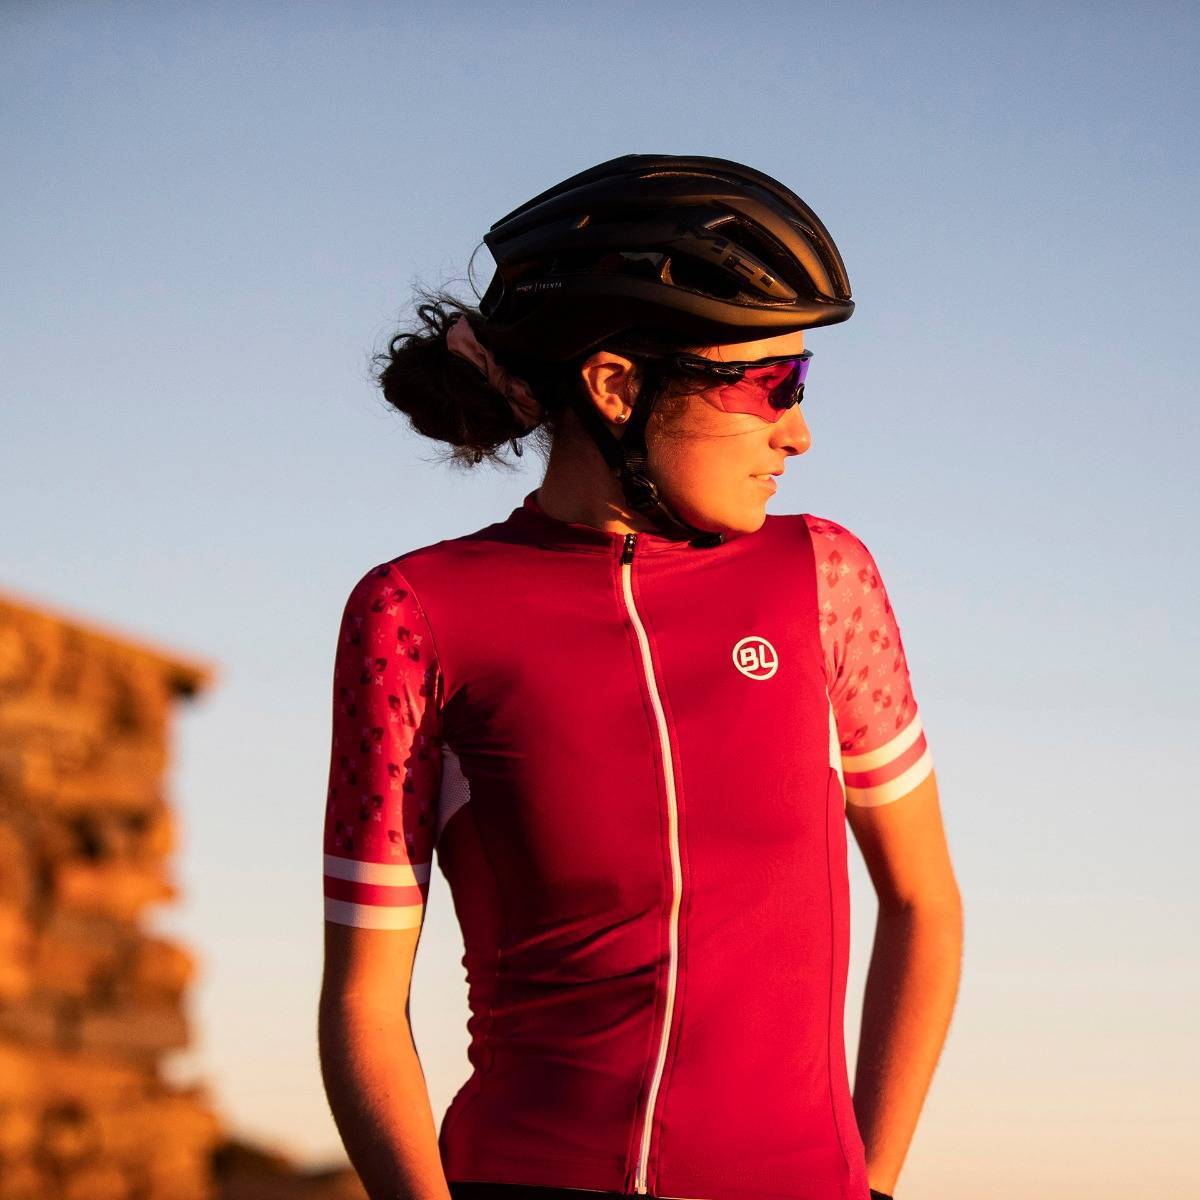 Maglia Ciclismo Donna | vlr.eng.br